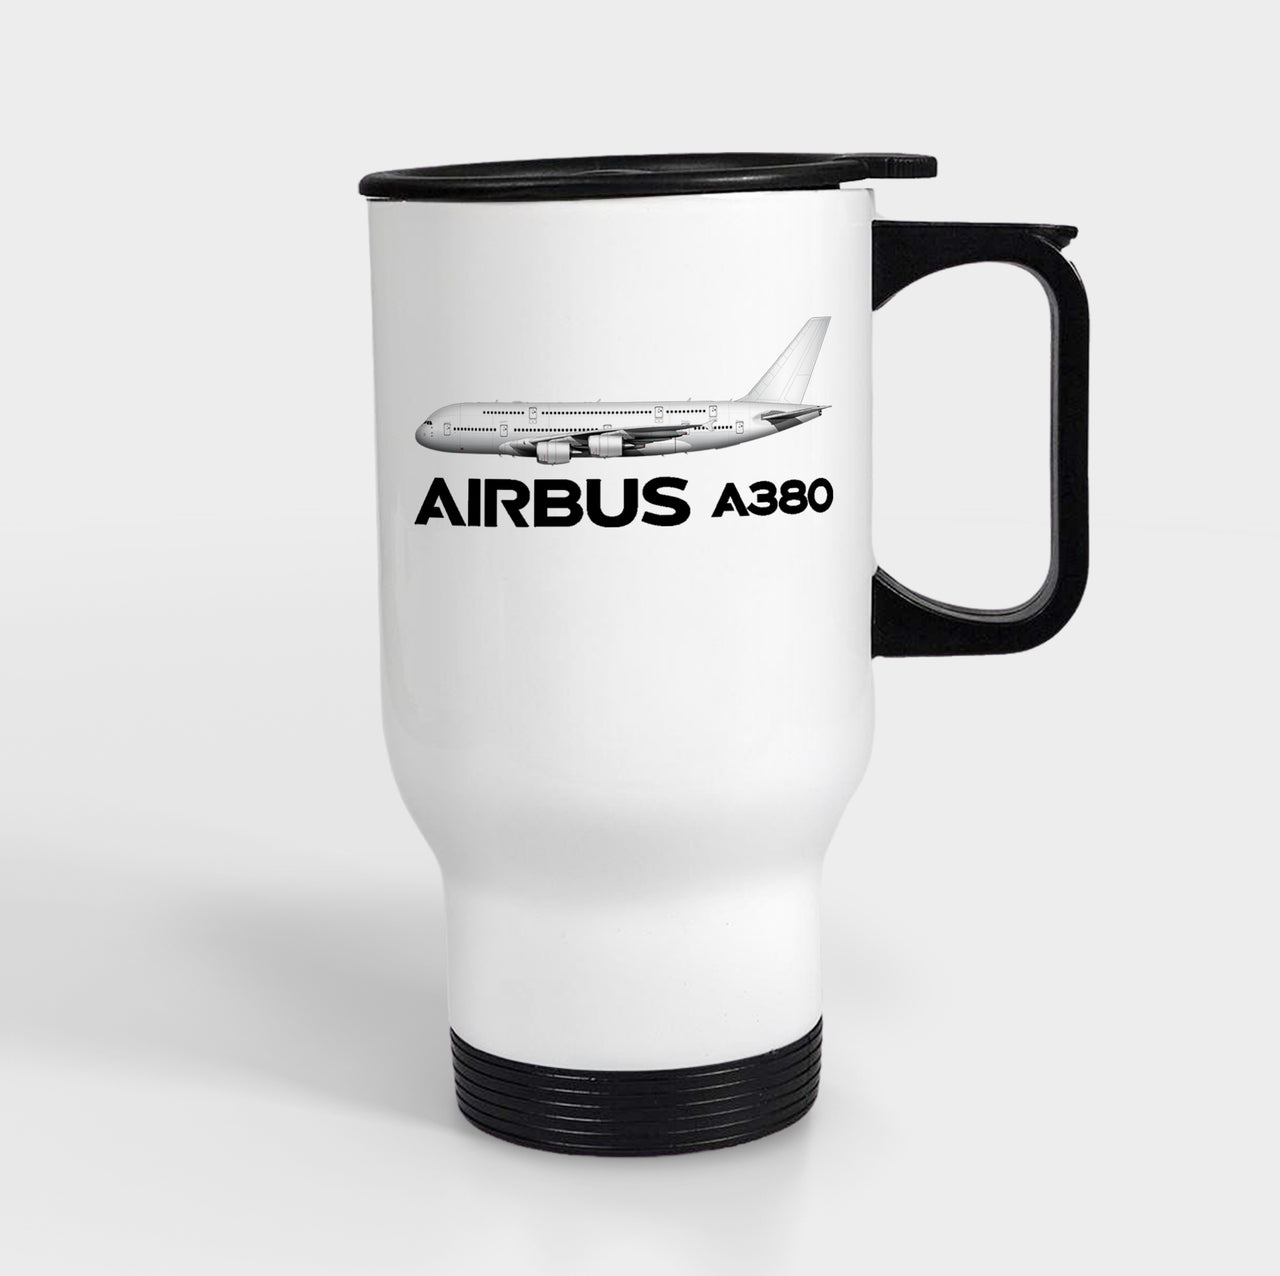 The Airbus A380 Designed Travel Mugs (With Holder)